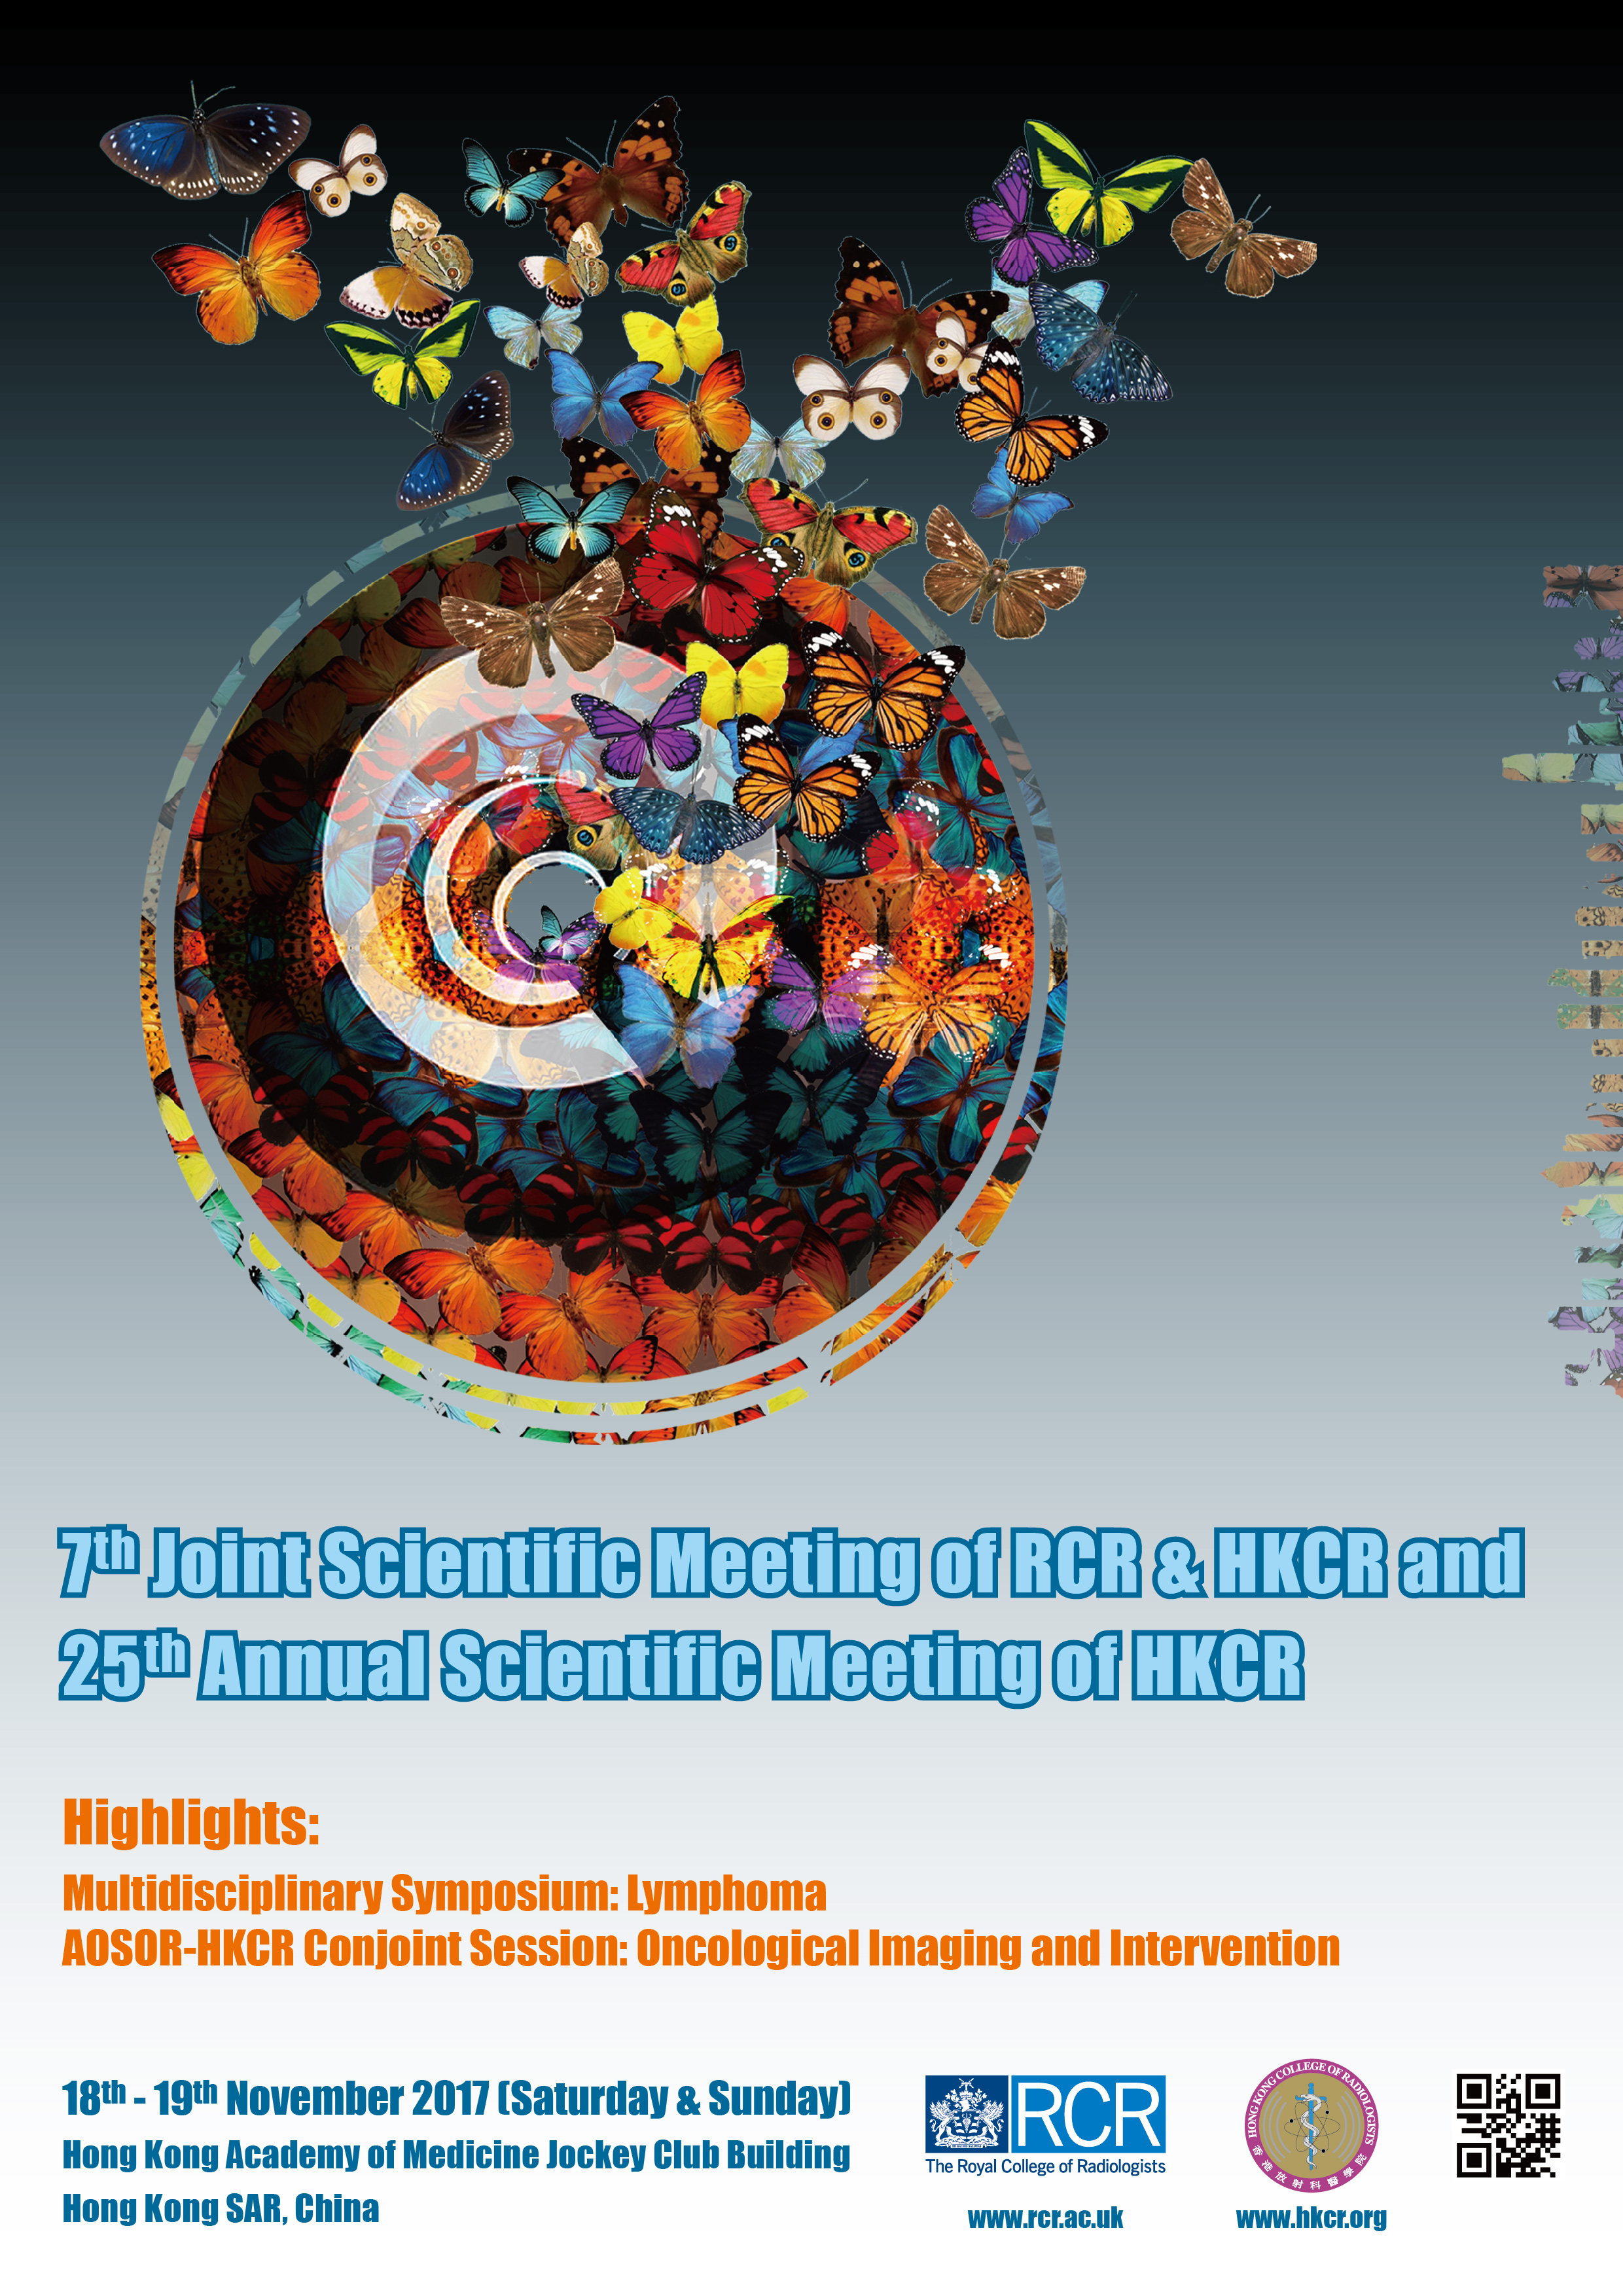 7th Joint Scientific Meeting of RCR & HKCR and 25th Annual Scientific Meeting of HKCR